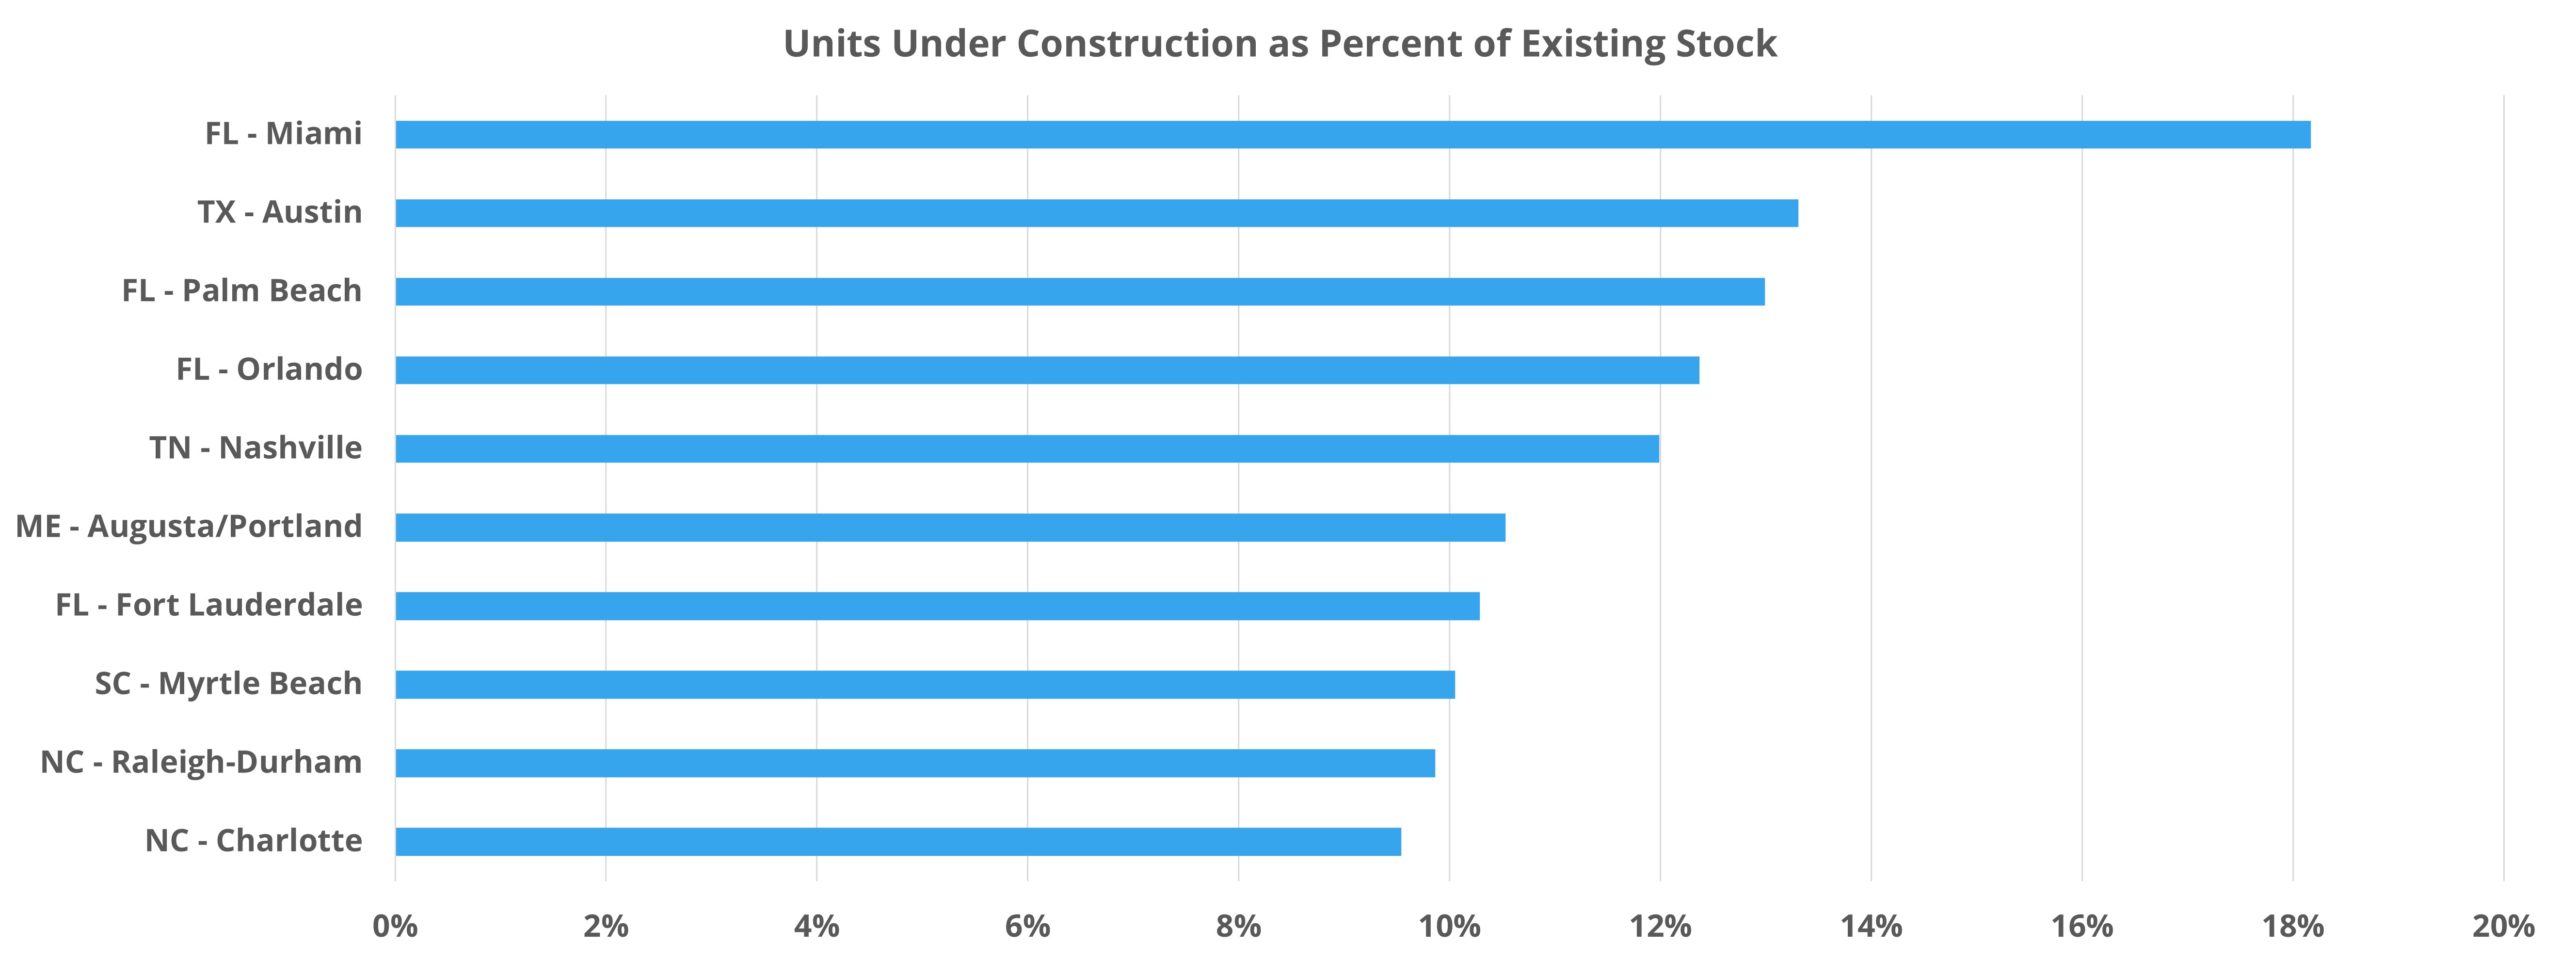 Units Under Construction as Percent of Existing Stock